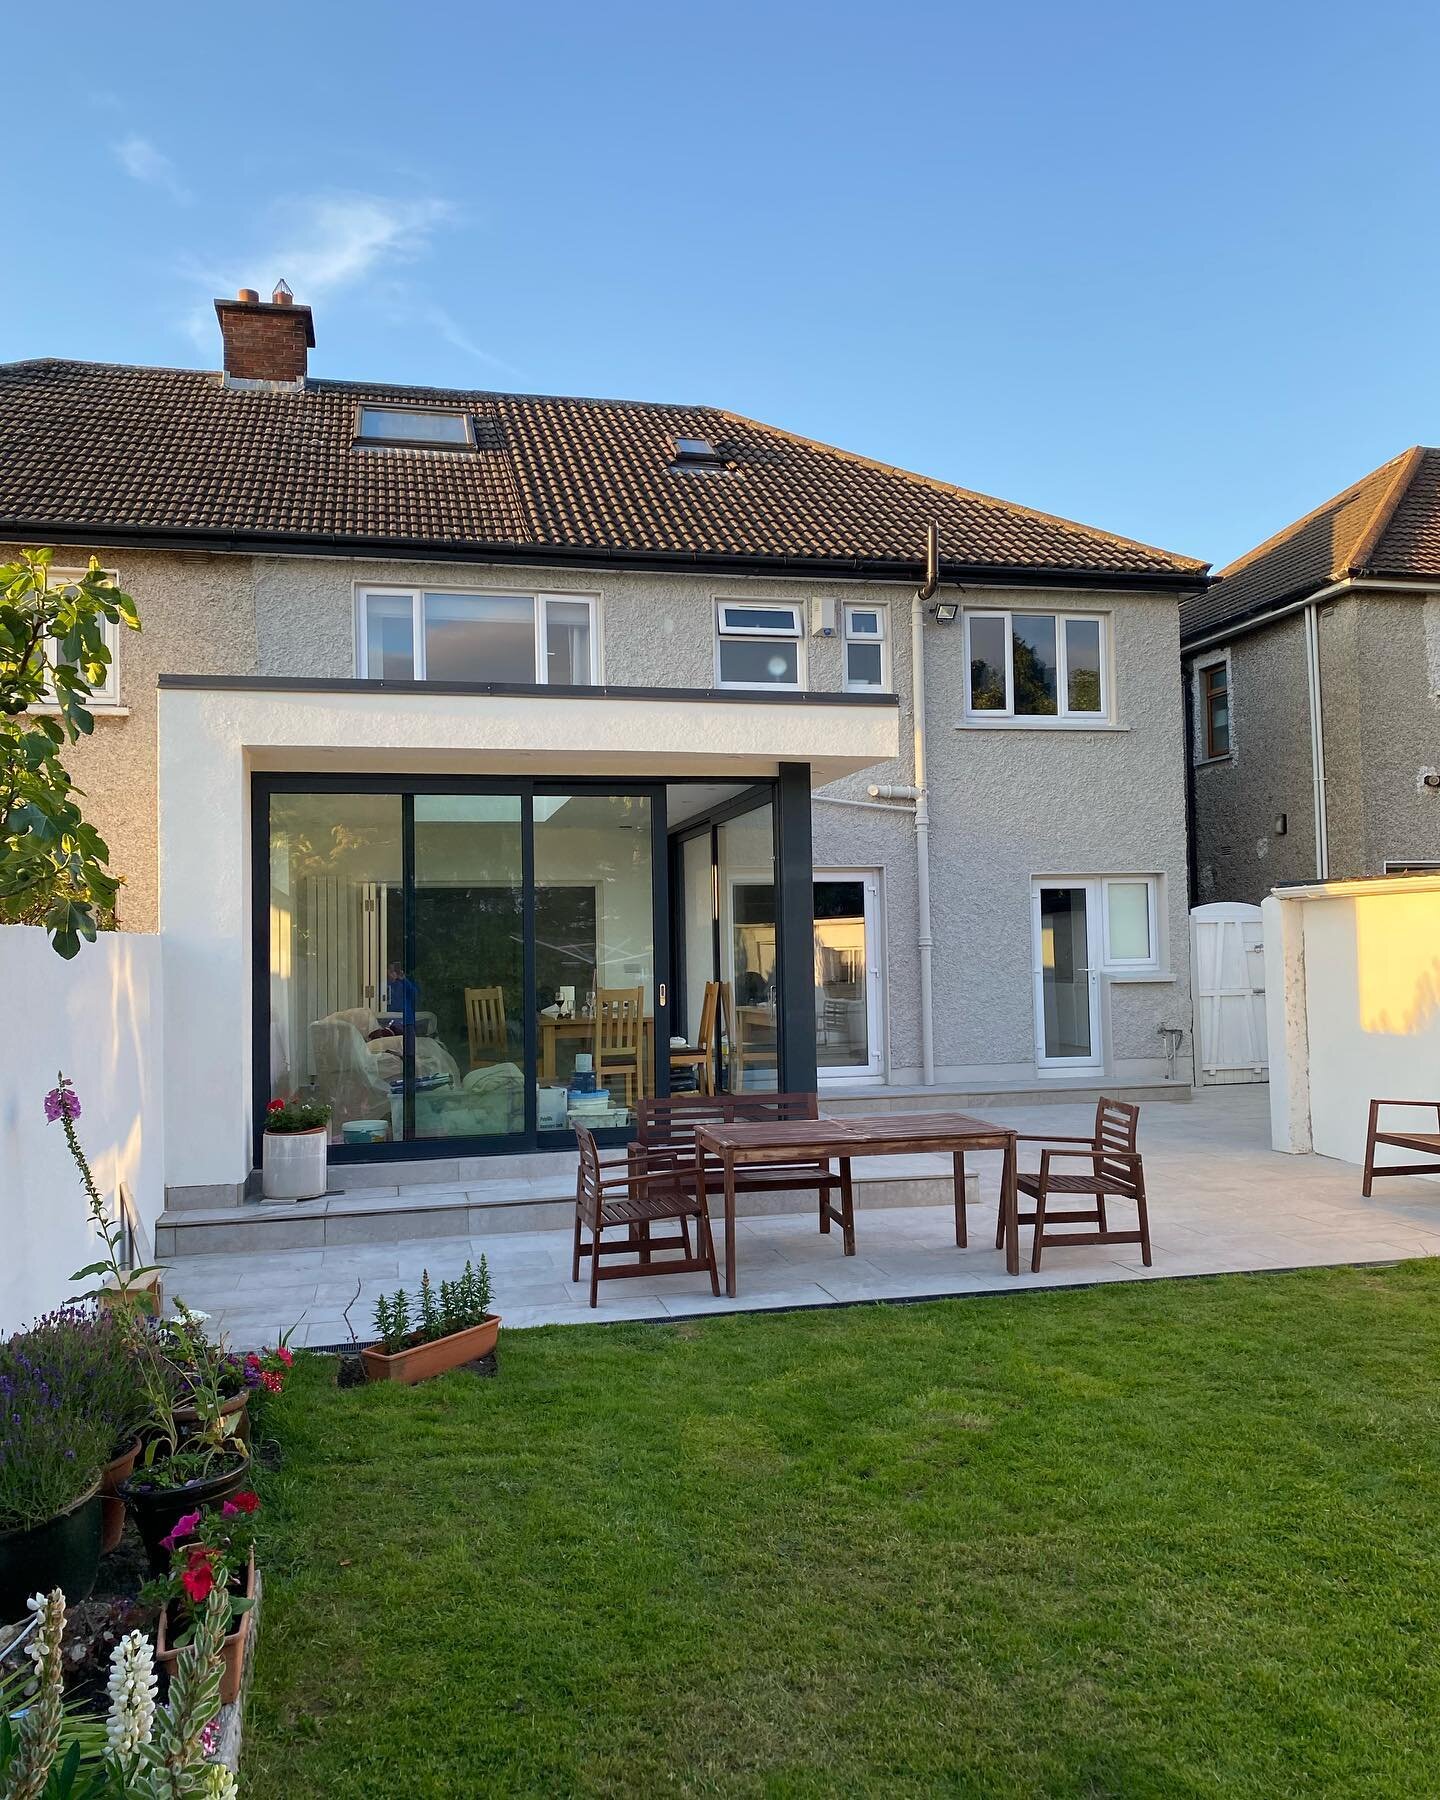 Completion photos of our Castleknock project. 

Extremely happy with how this reconstruction turned out. 
We listened to what the clients wanted and worked together throughout the process to ensure a stress free build period. 
Clients are over the mo